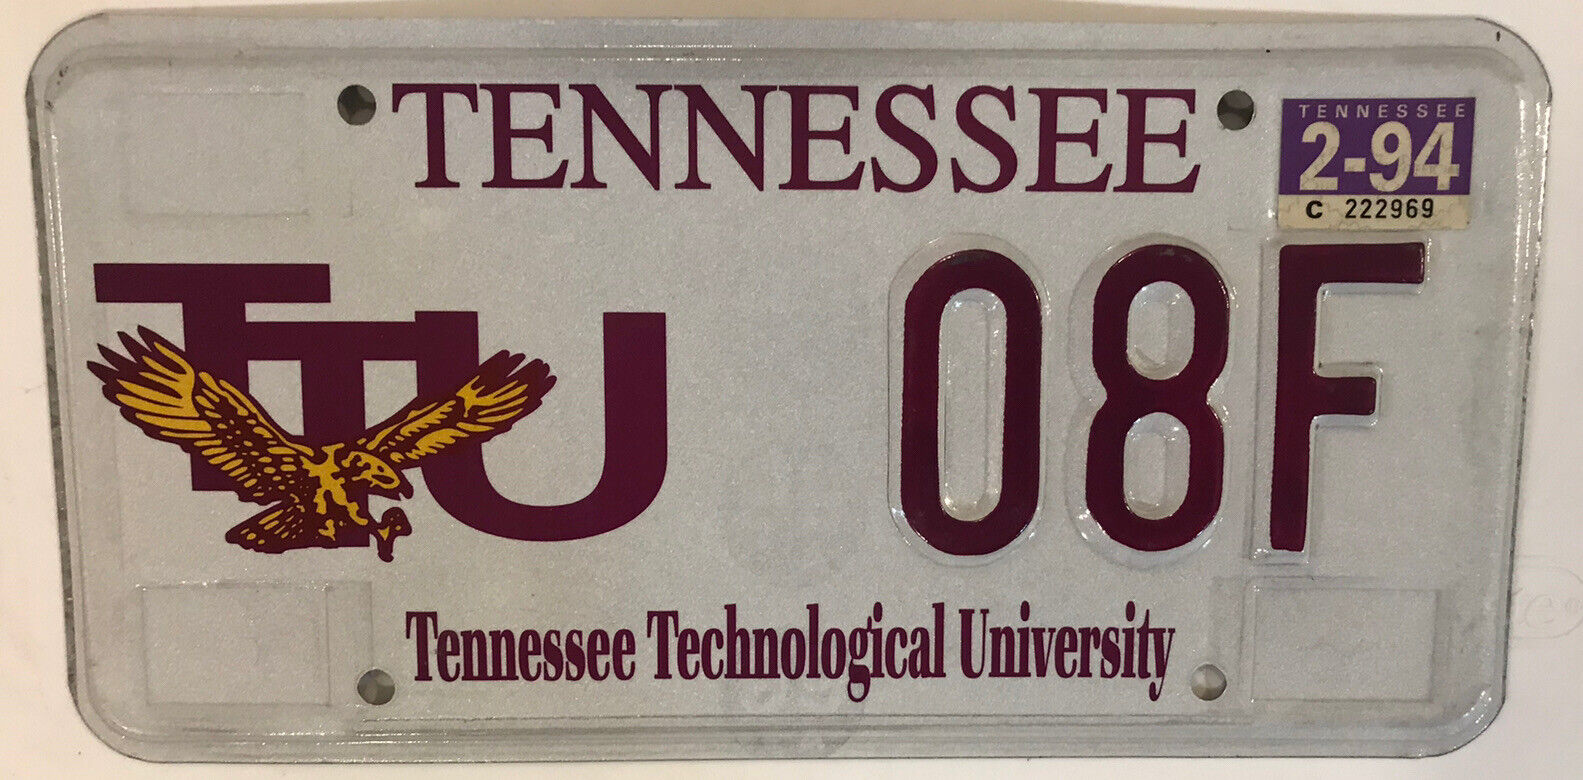 TENNESSEE TECH TECHNOLOGICAL UNIVERSITY license plate Awesome Golden Eagles TTU